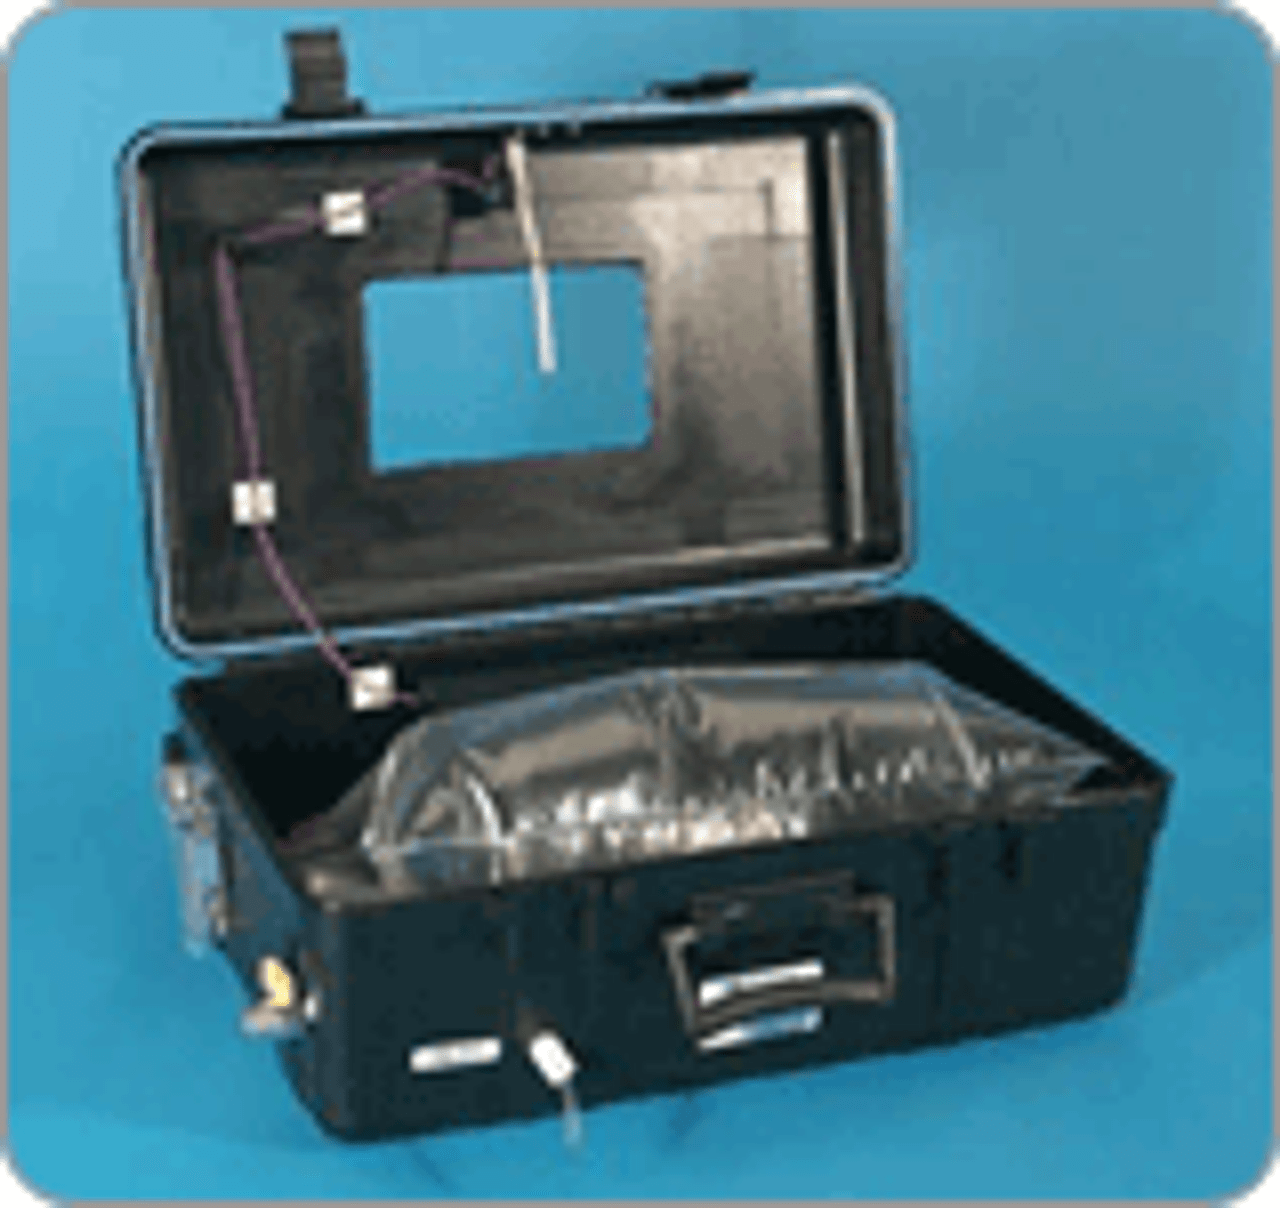 Pack of 10 10L PTFE Air and Gas Sampling Bag with Combination Valve